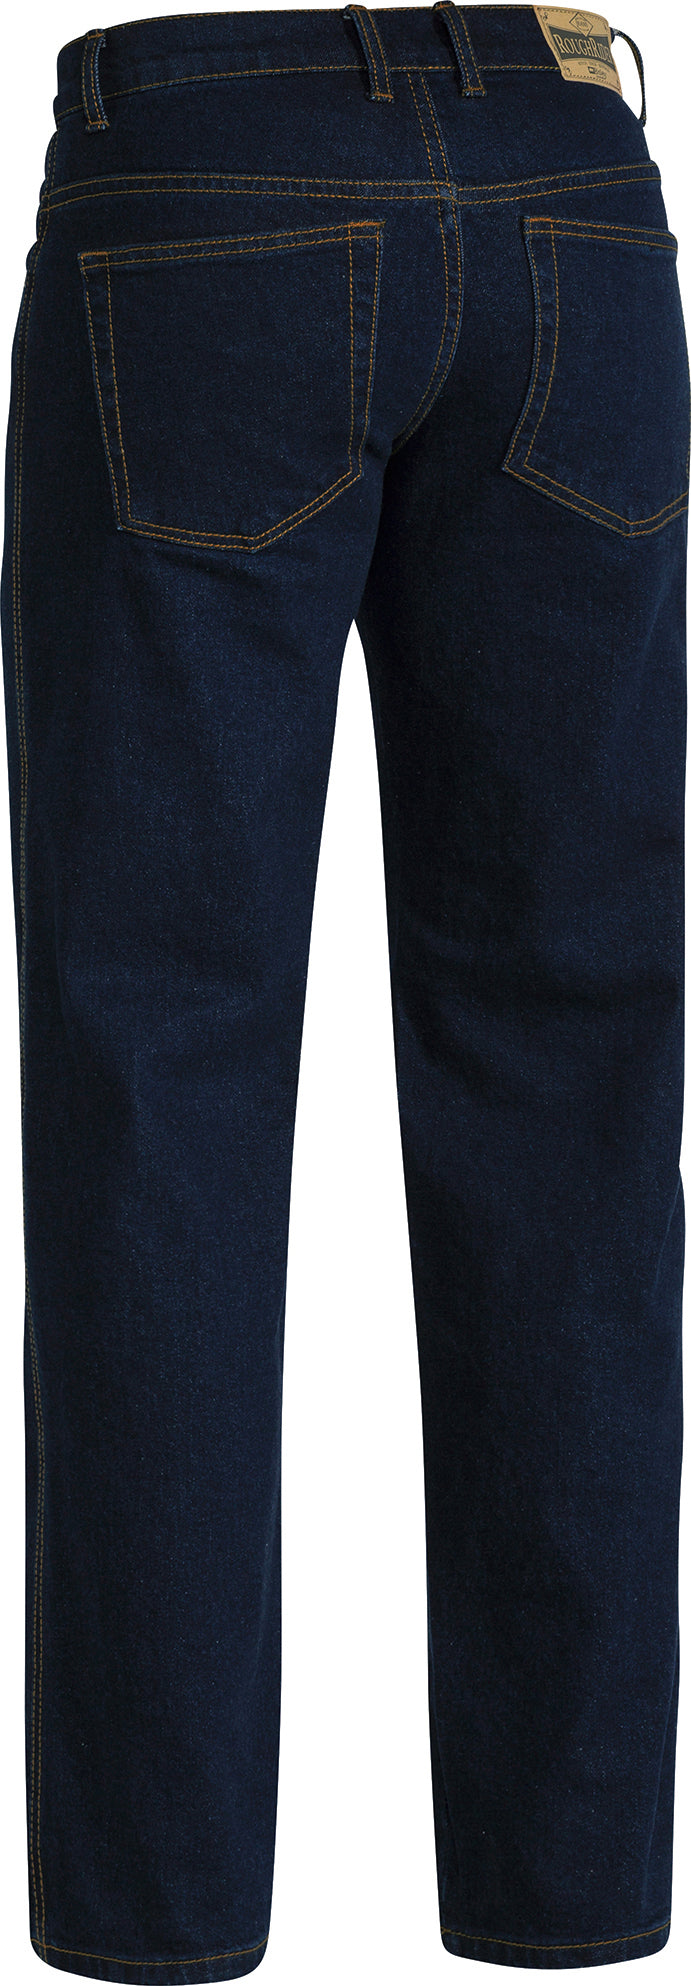 Load image into Gallery viewer, Wholesale BP6712 Bisley Rough Rider Denim Stretch Jeans - Stout Printed or Blank
